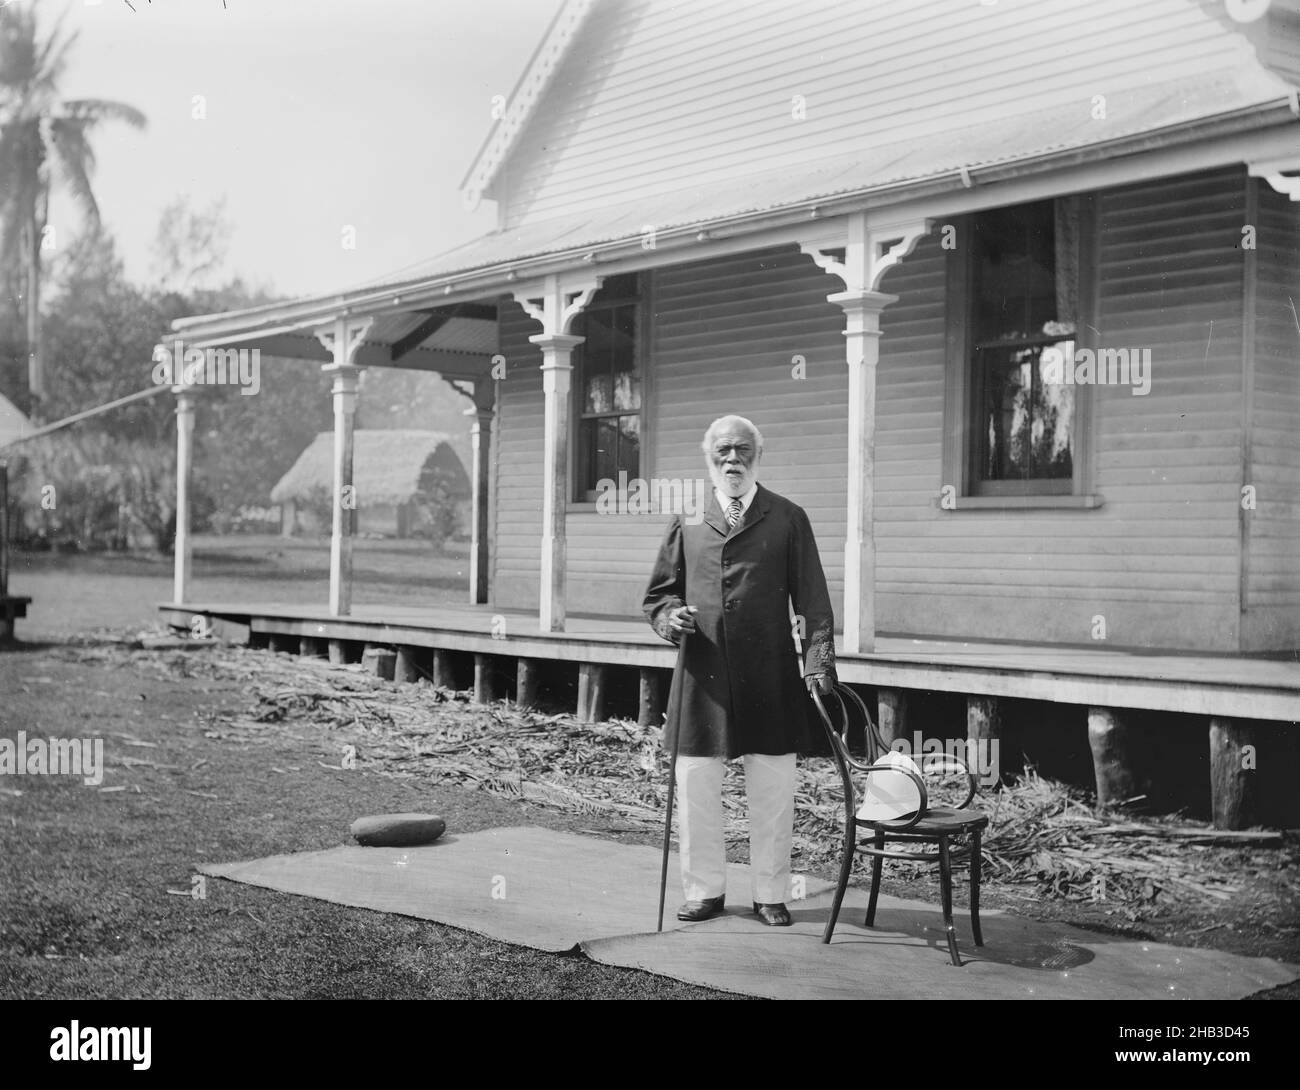 [King George of Tonga], Burton Brothers studio, photography studio, 26 July 1884, New Zealand, black-and-white photography, Semi-formal outdoor portrait of King George of Tonga, 86 years old, in front of the palace at Neiafu Stock Photo